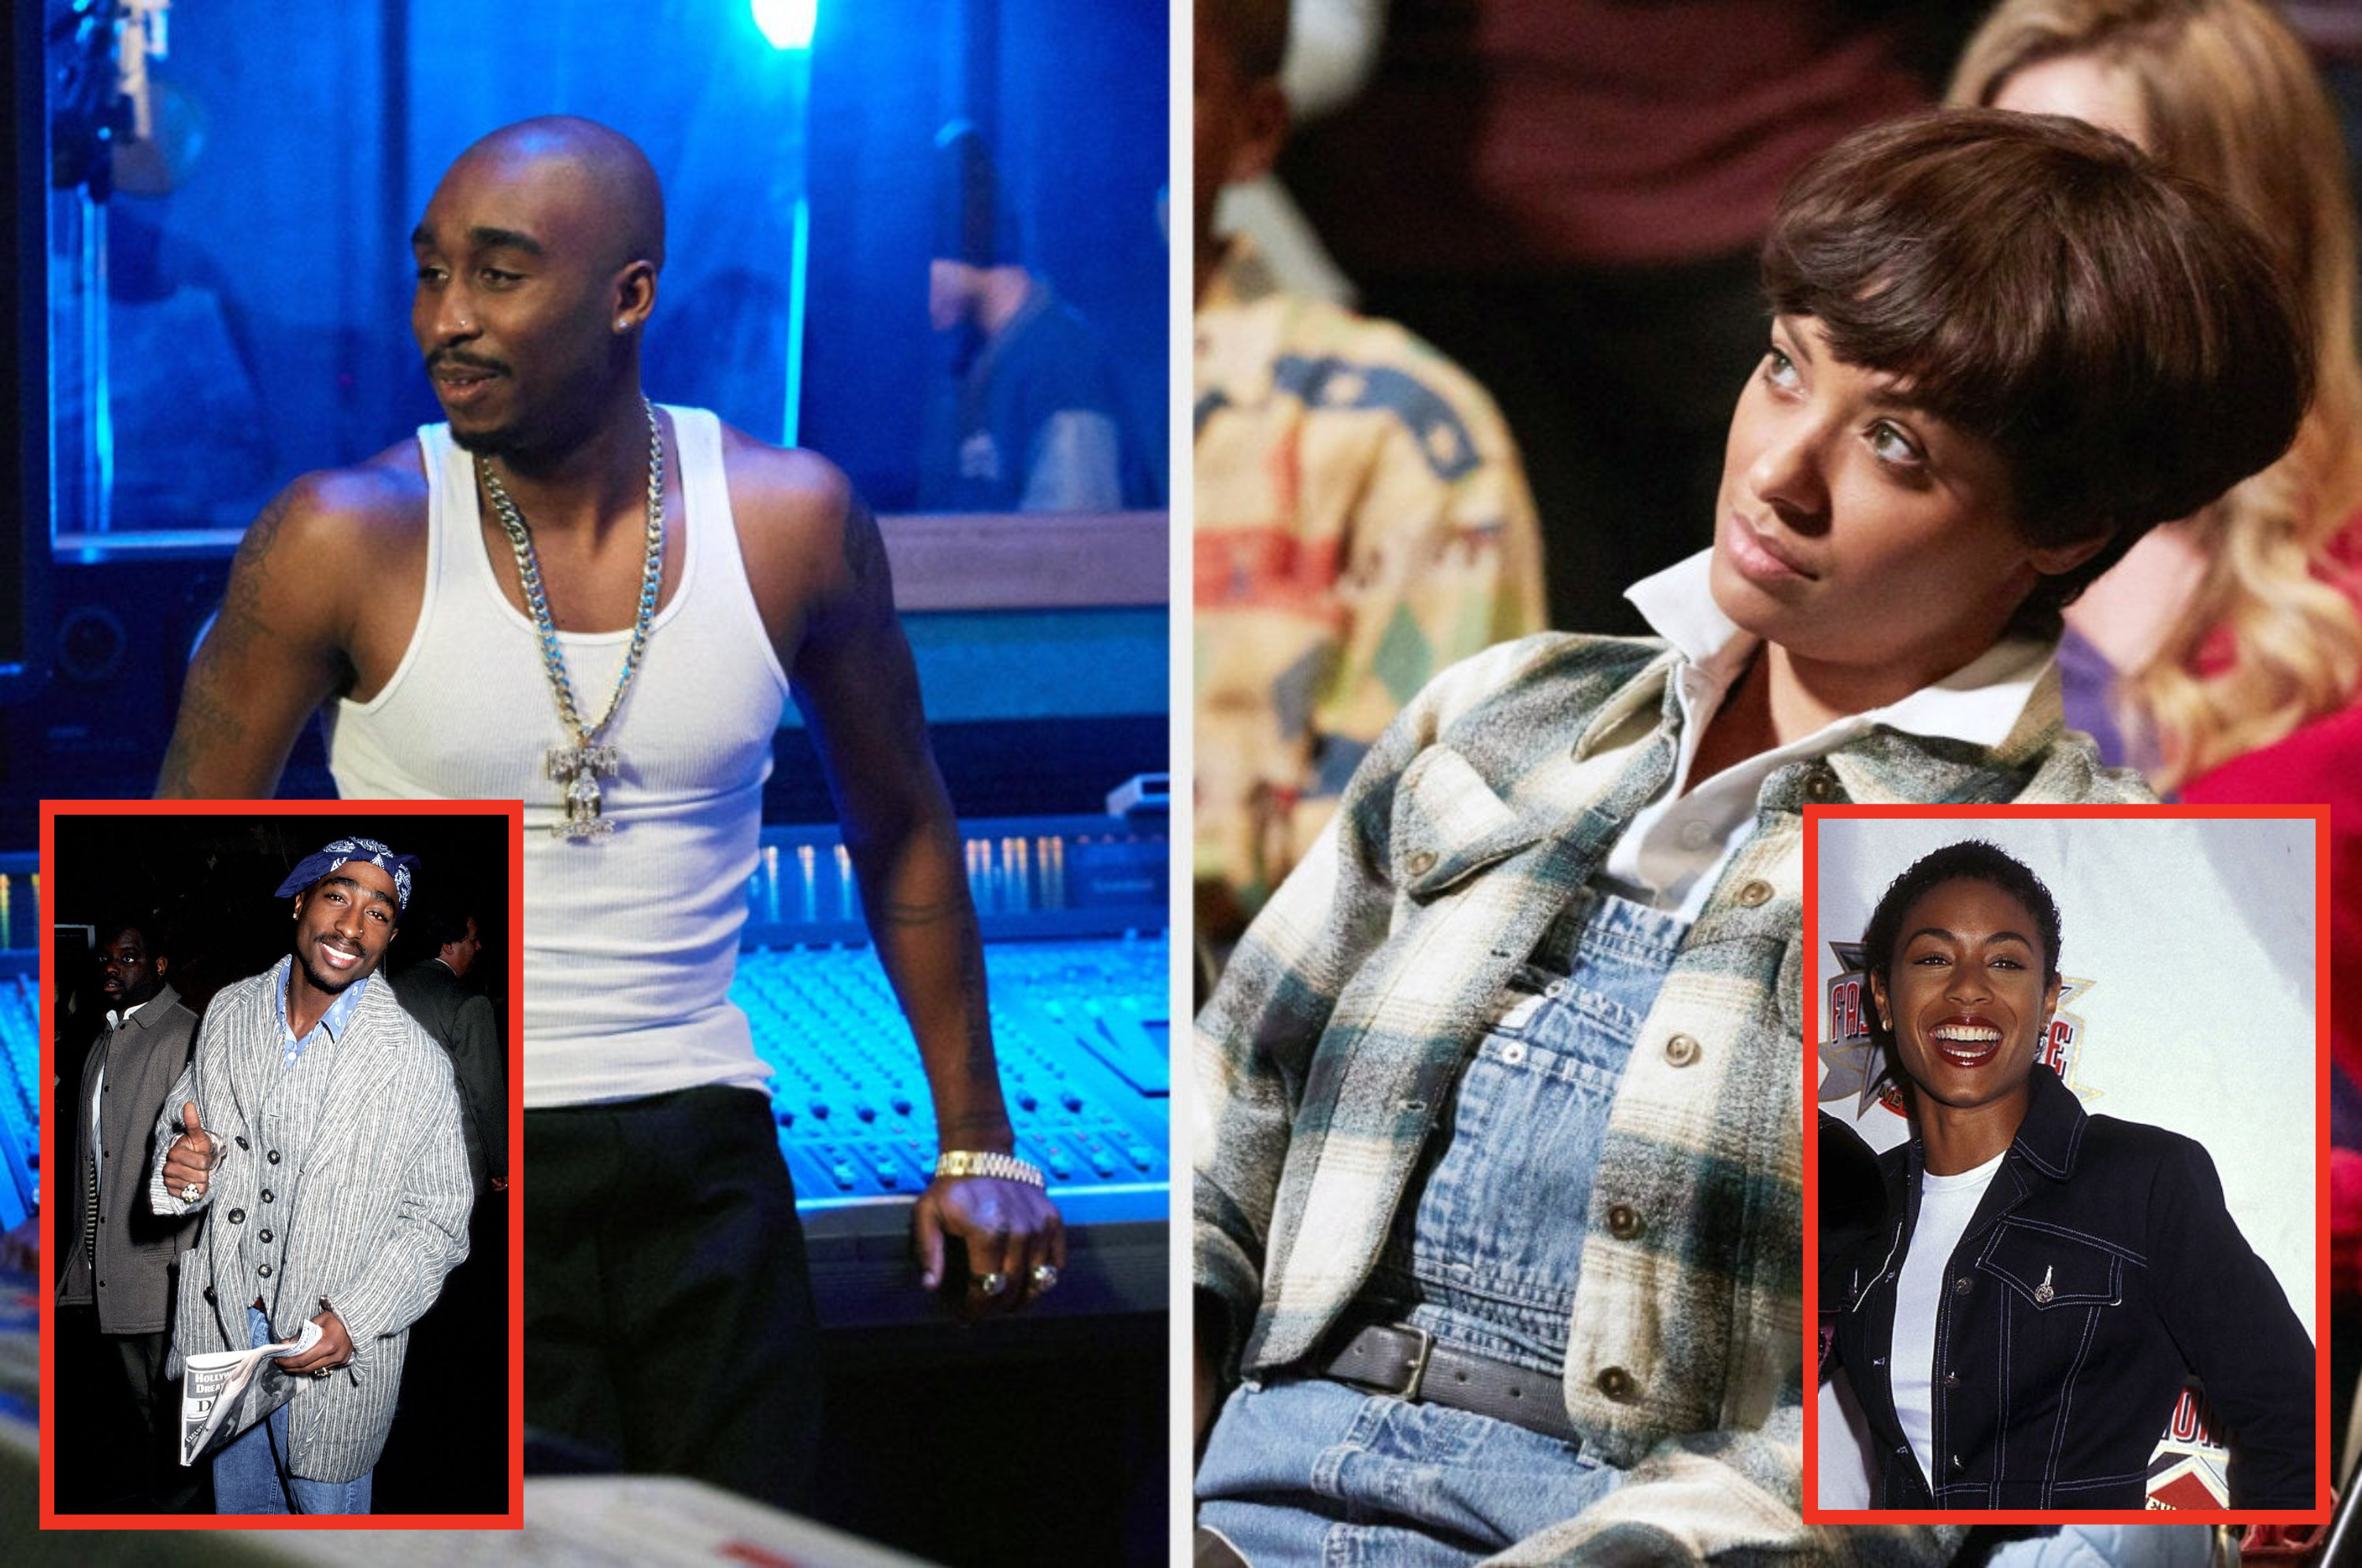 Demetrius Shipp Jr. as Tupac Shakur stands in a recording studio; Kat Graham as Jada Pinkett sits in a chair and looks up in &quot;All Eyez on Me&quot;